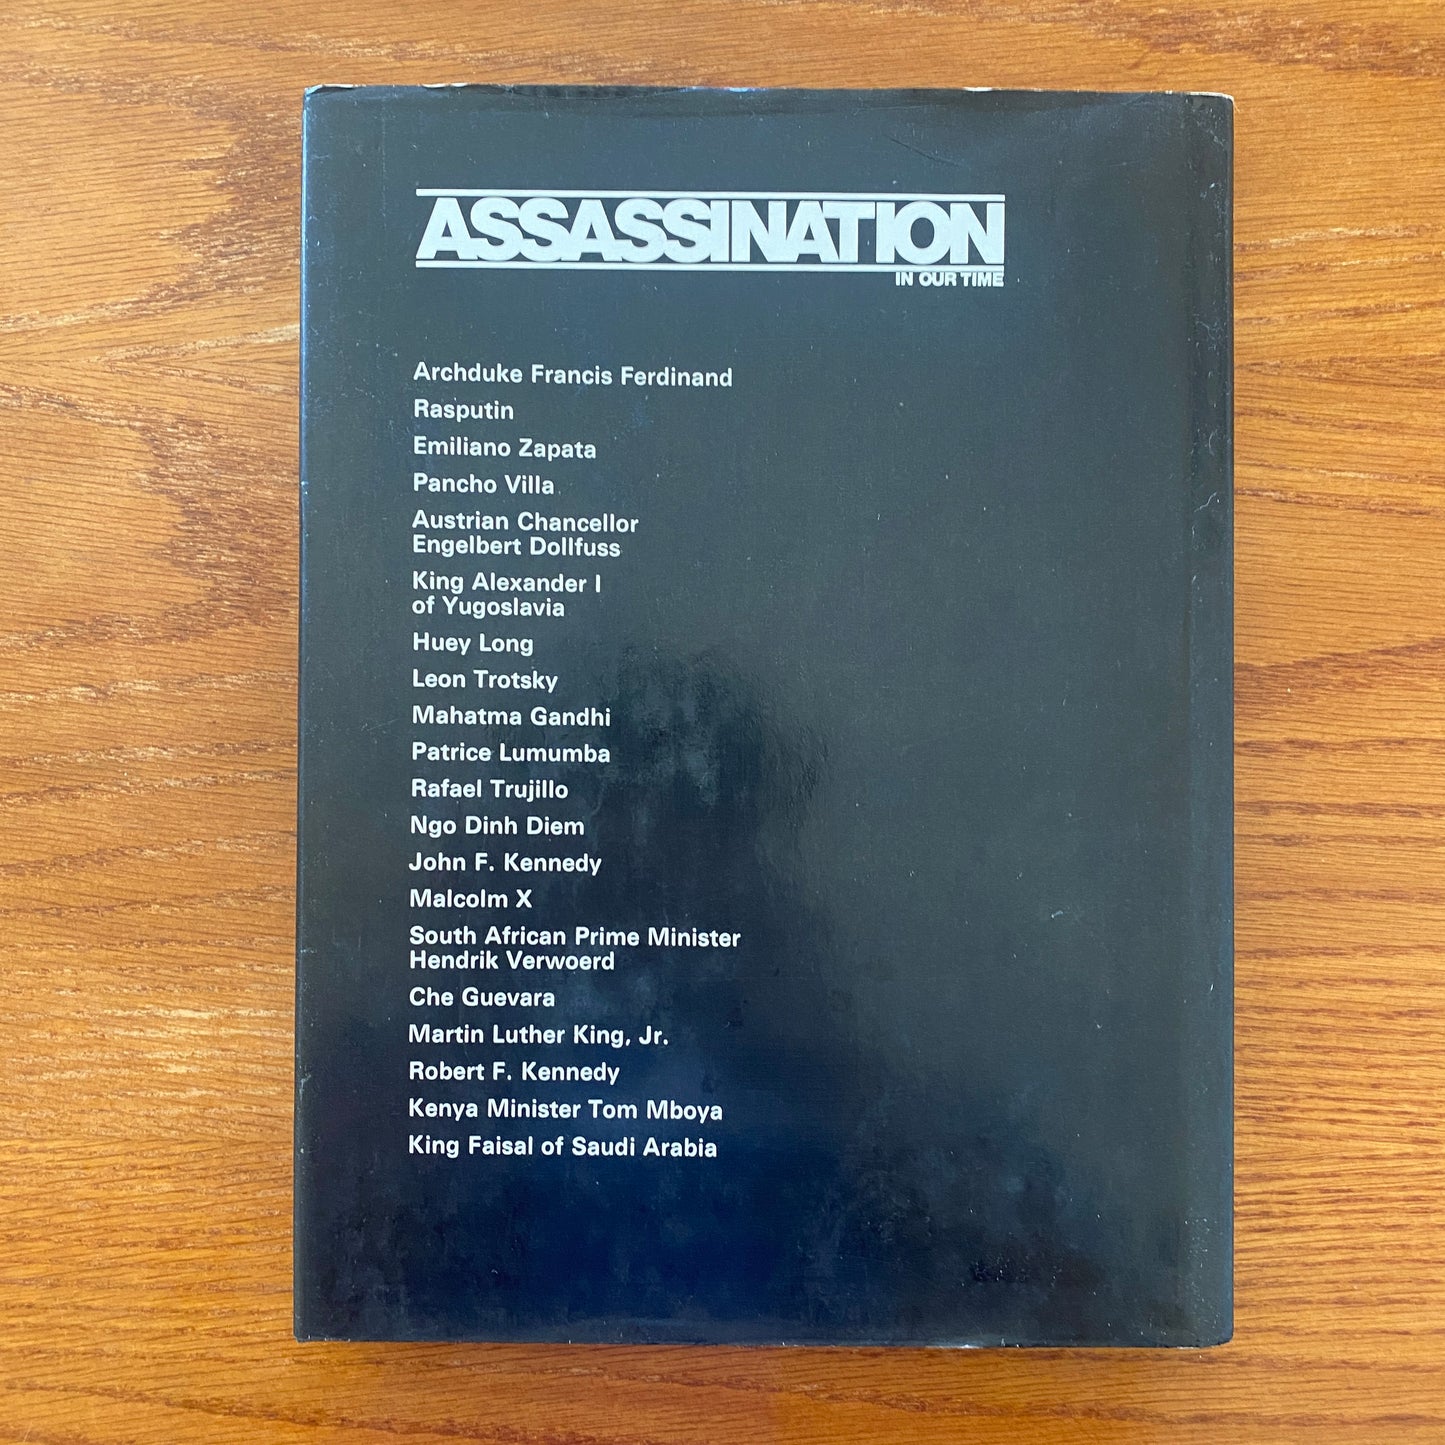 Assassination In Our Time - Sandy Lesberg